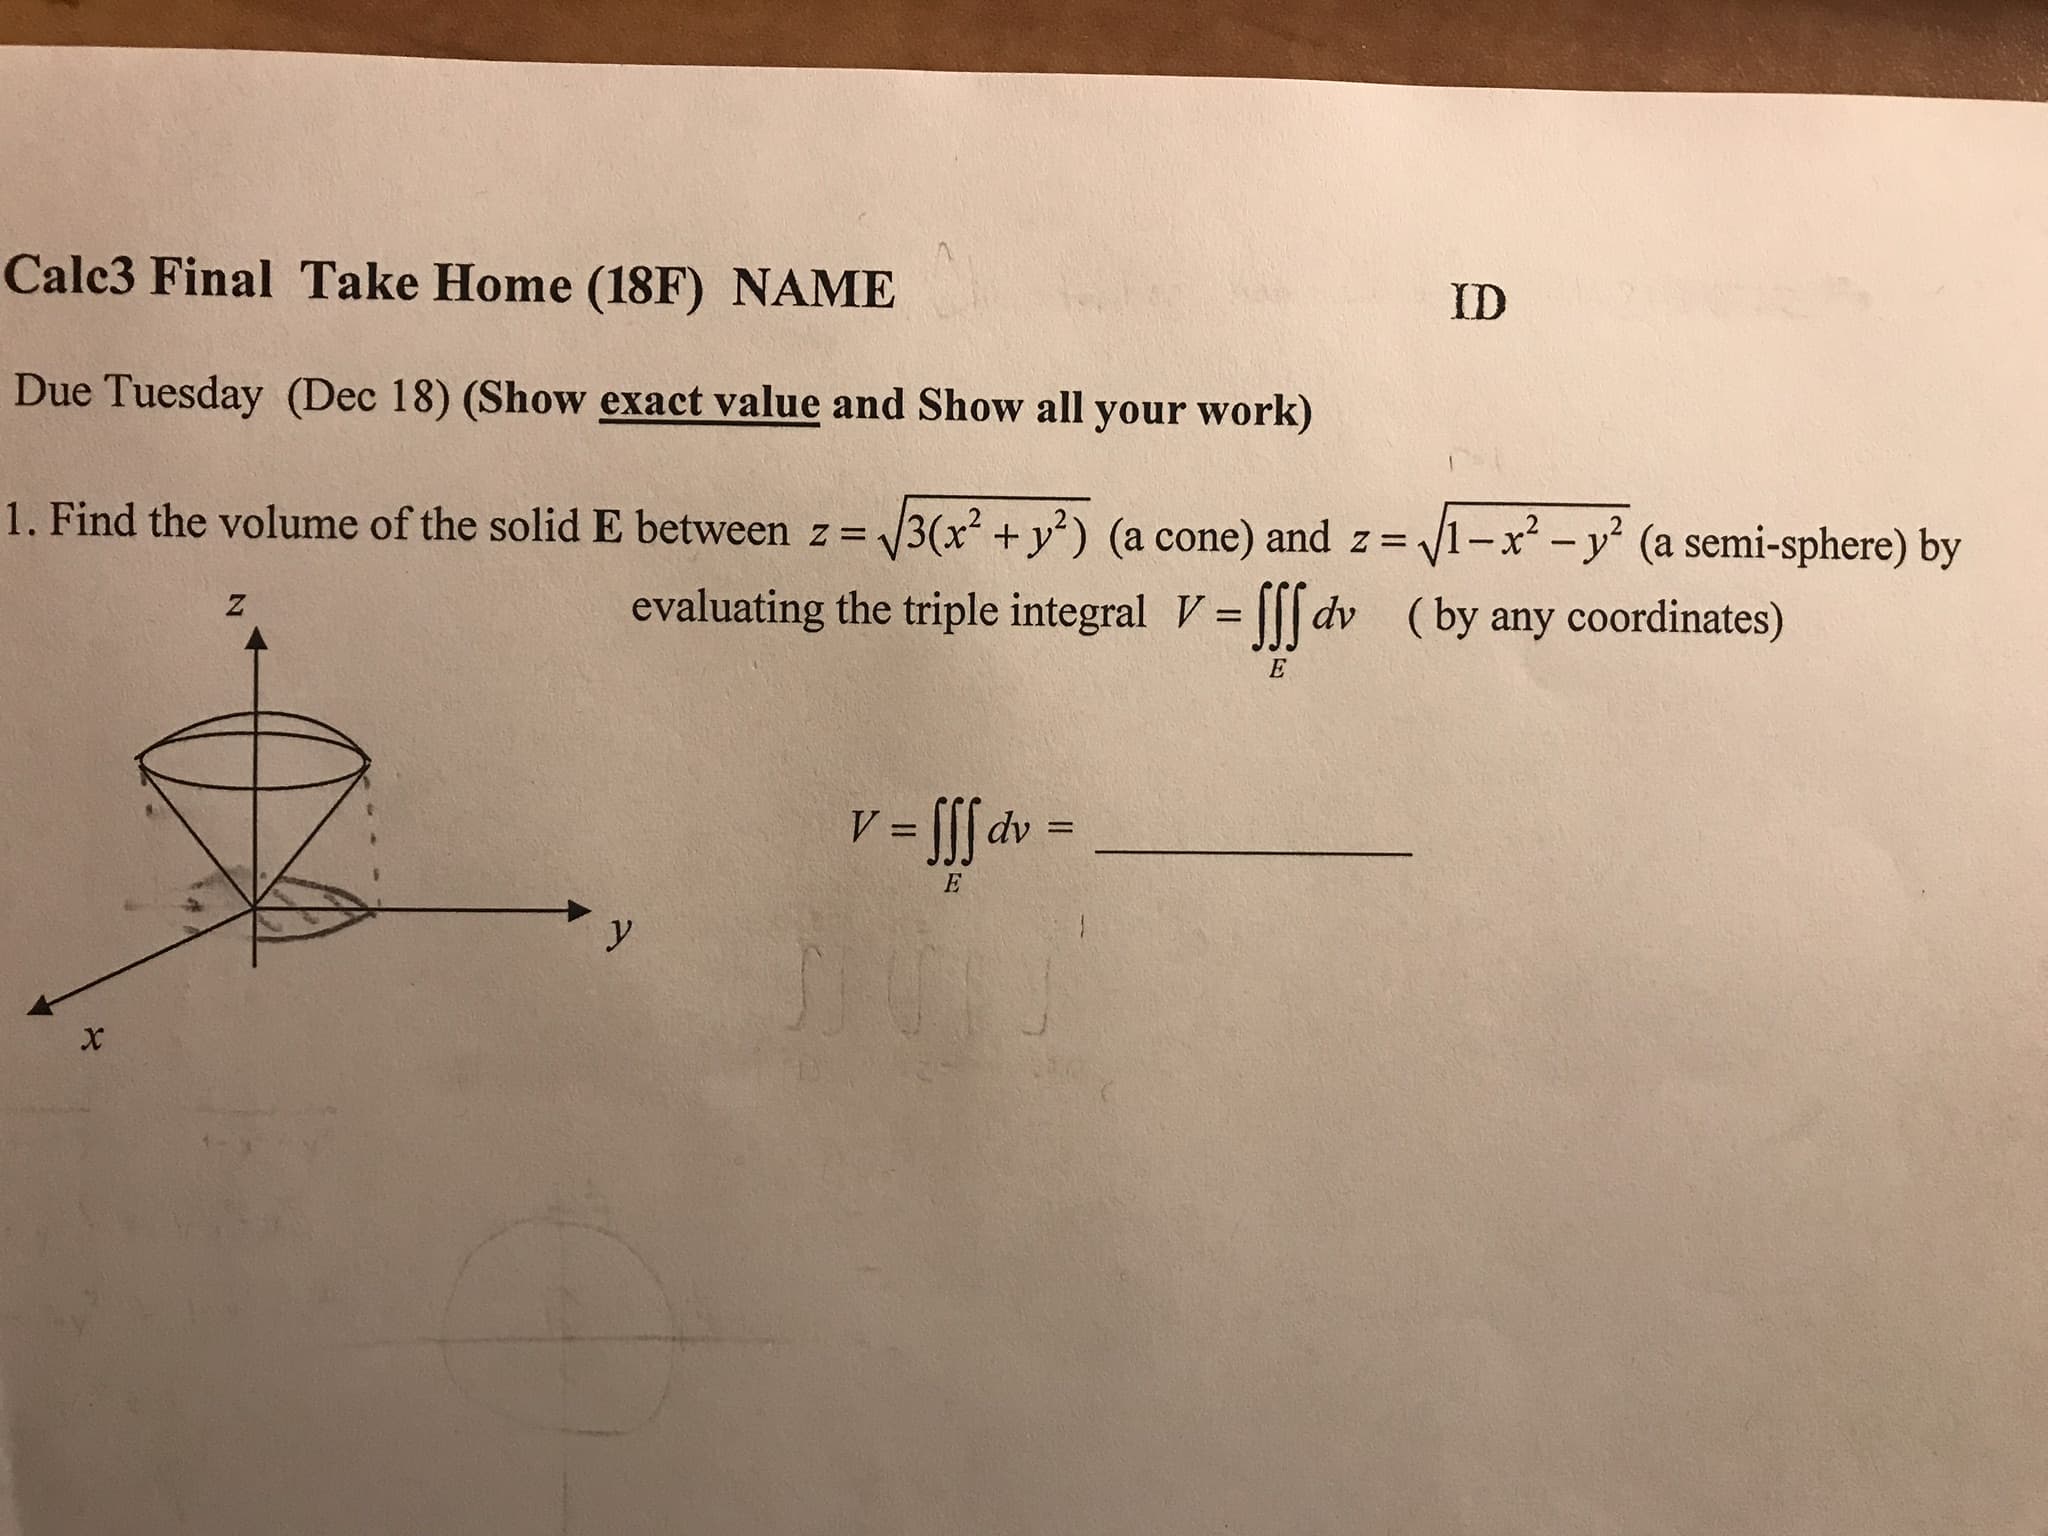 Cale3 Final Take Home (18F) NAME
Due Tuesday (Dec 18) (Show exact value and Show all your work)
1 . Find the volume of the solid E between z 3 x2 + уг) (a cone) and z-f
ID
x2-y2 (a semi-sphere) by
(by any coordinates)
evaluating the triple integral Vlldv
